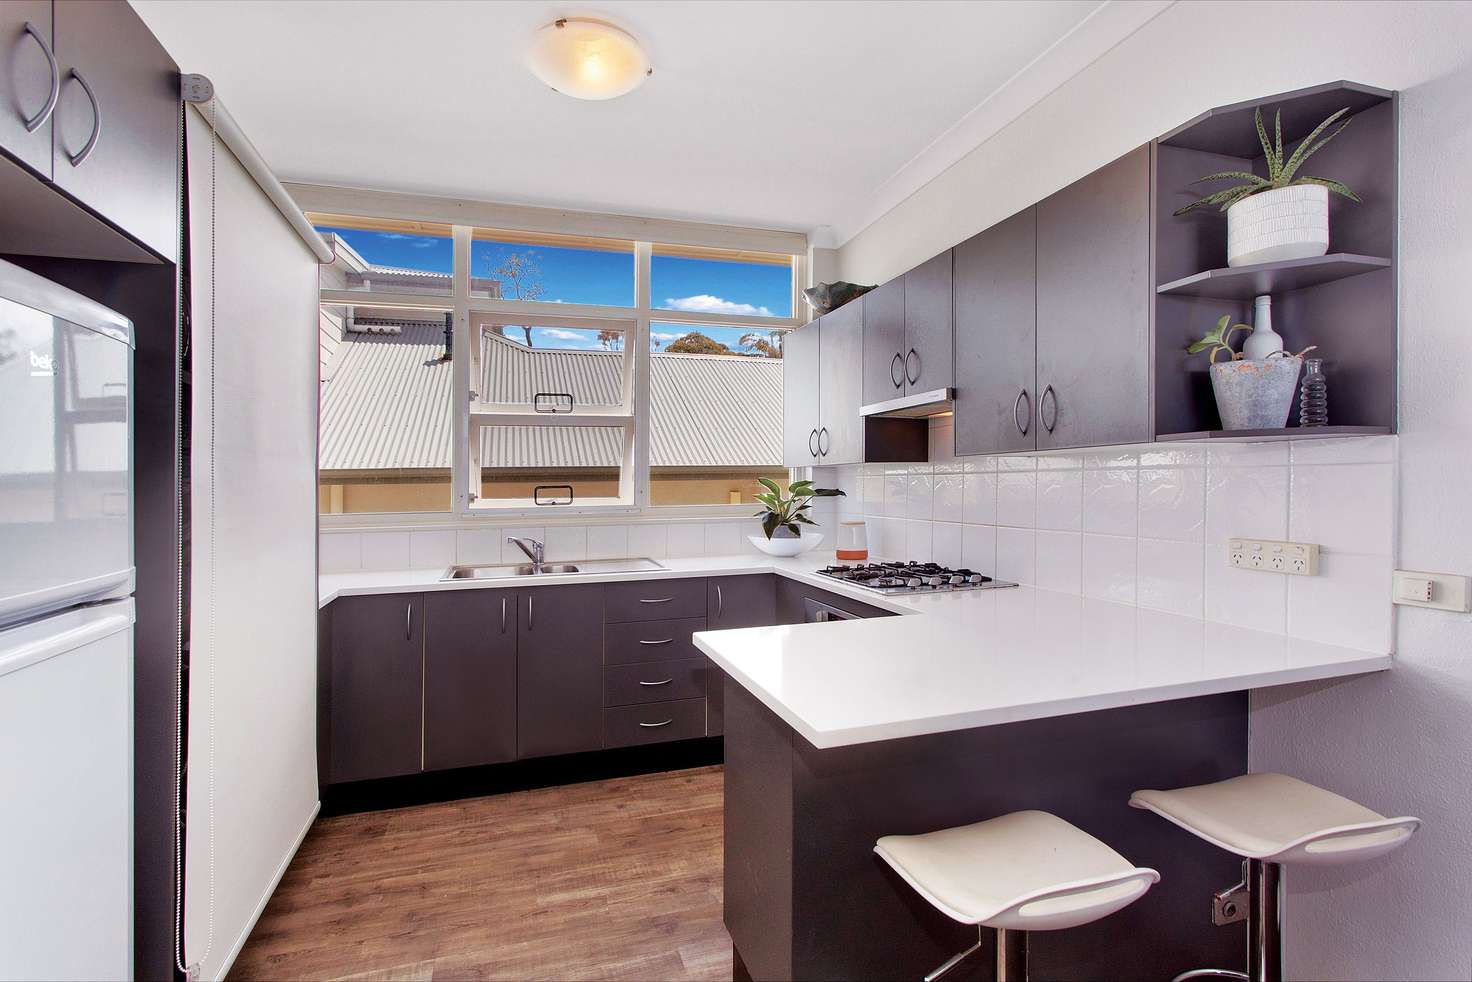 Main view of Homely apartment listing, 4/40 Ocean Grove, Collaroy NSW 2097